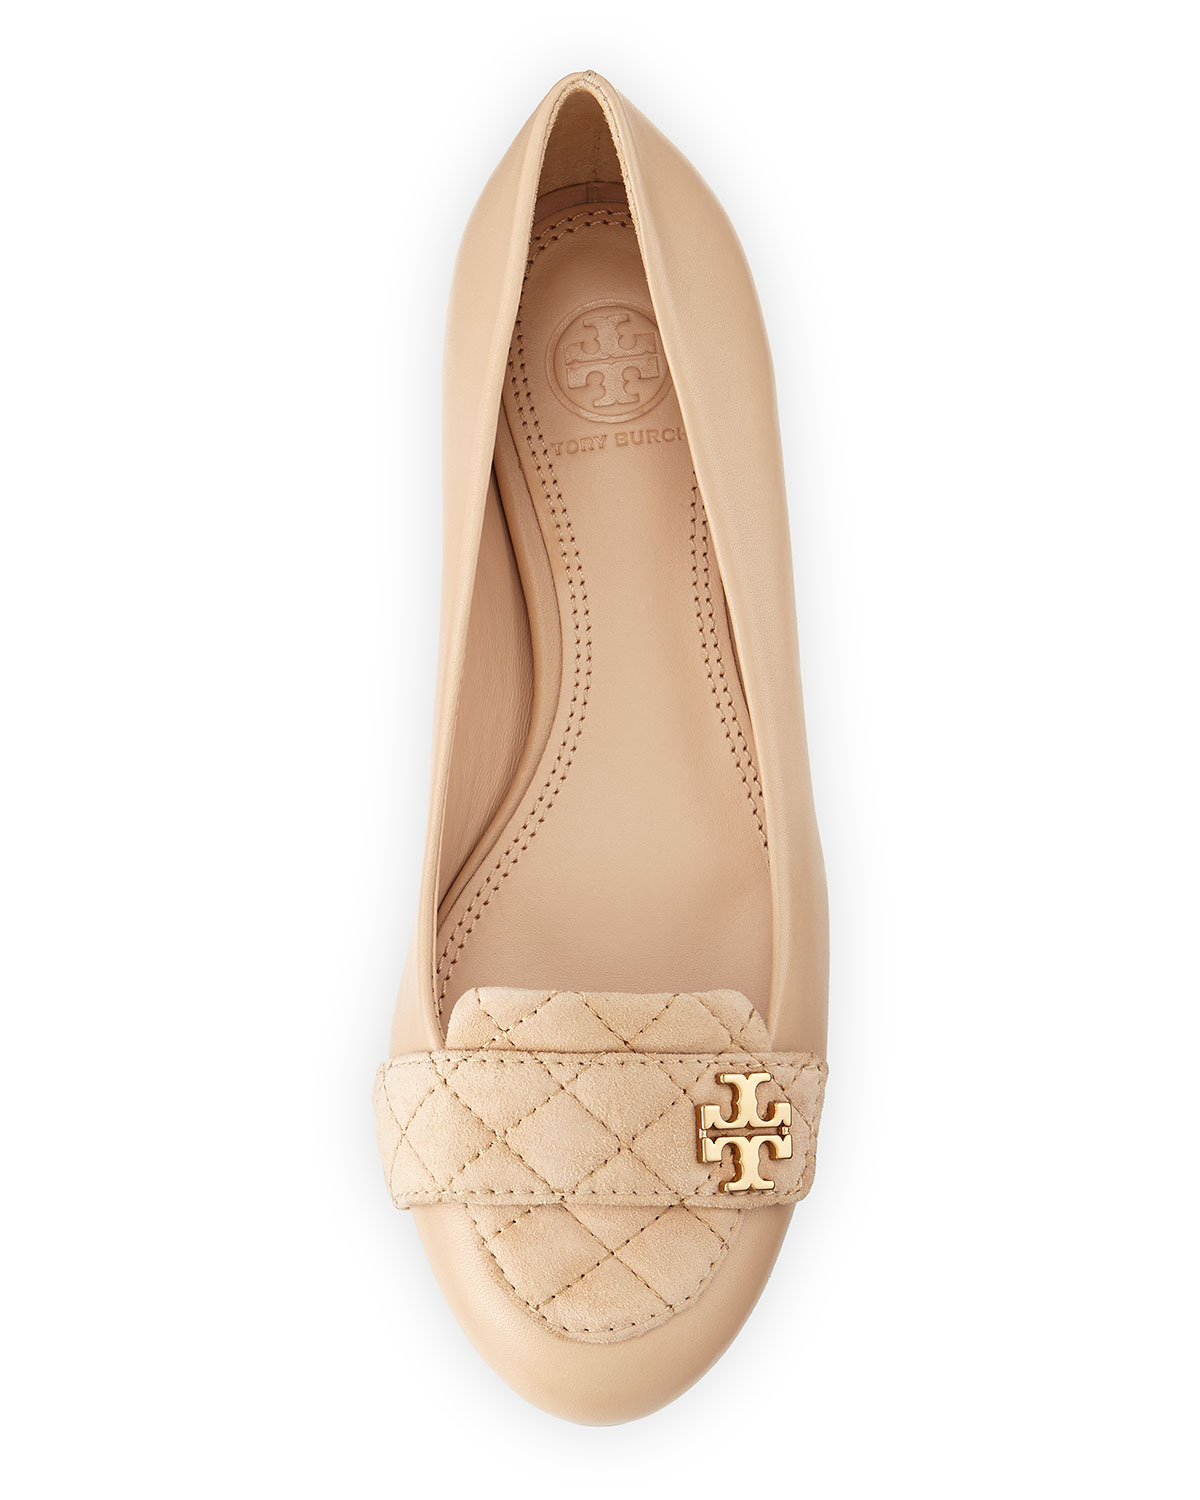 Tory Burch Leila Quilted Ballerina Loafer in Natural - Lyst